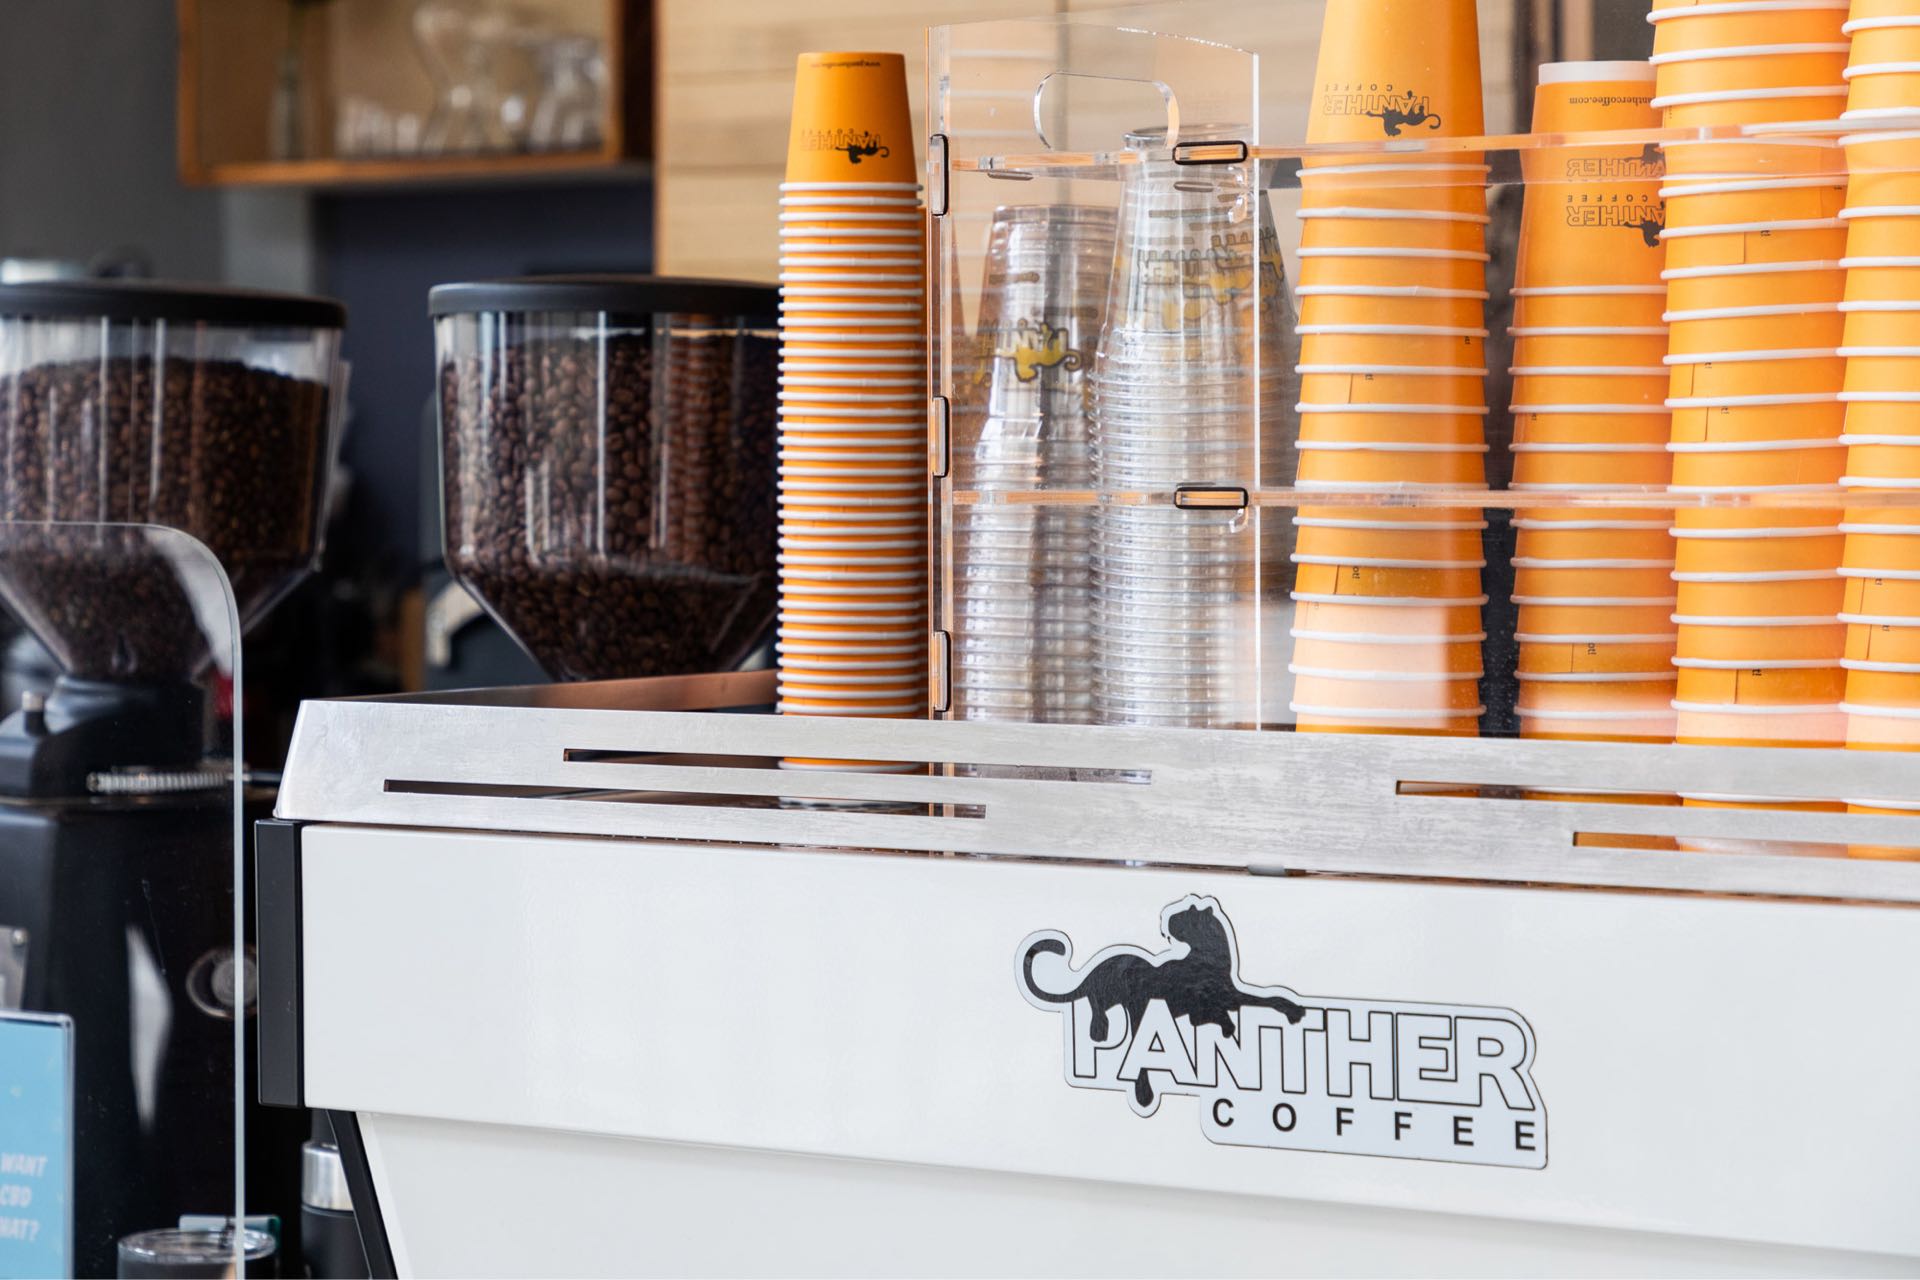 Panther Coffee in MiMo